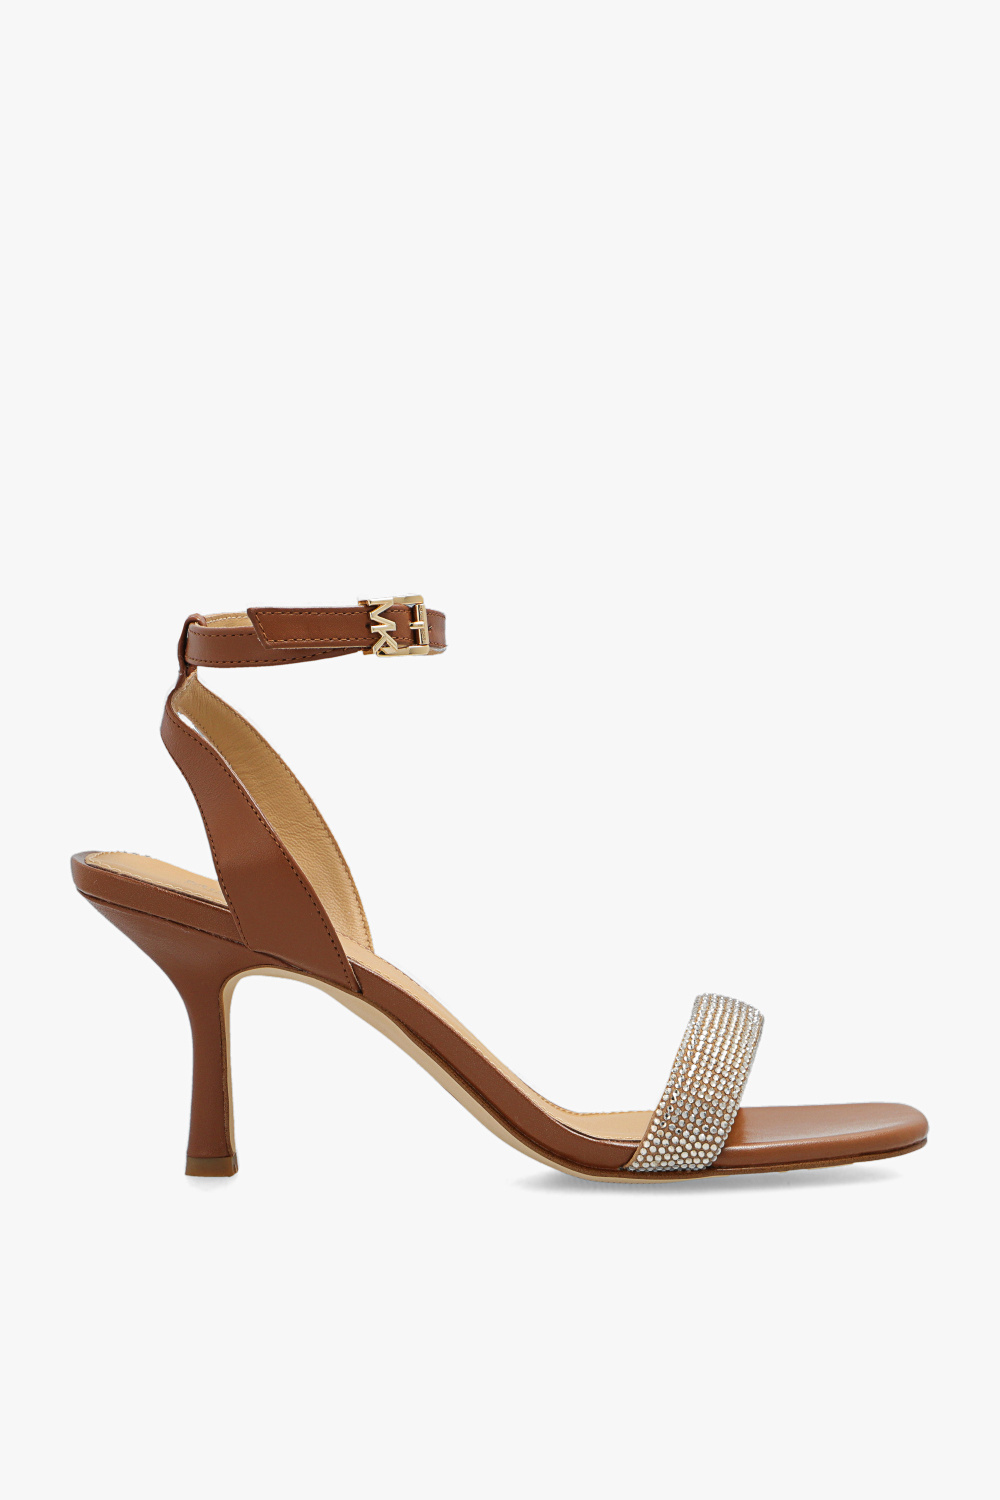 The California slip-on shoes Nude ‘Carrie’ heeled sandals